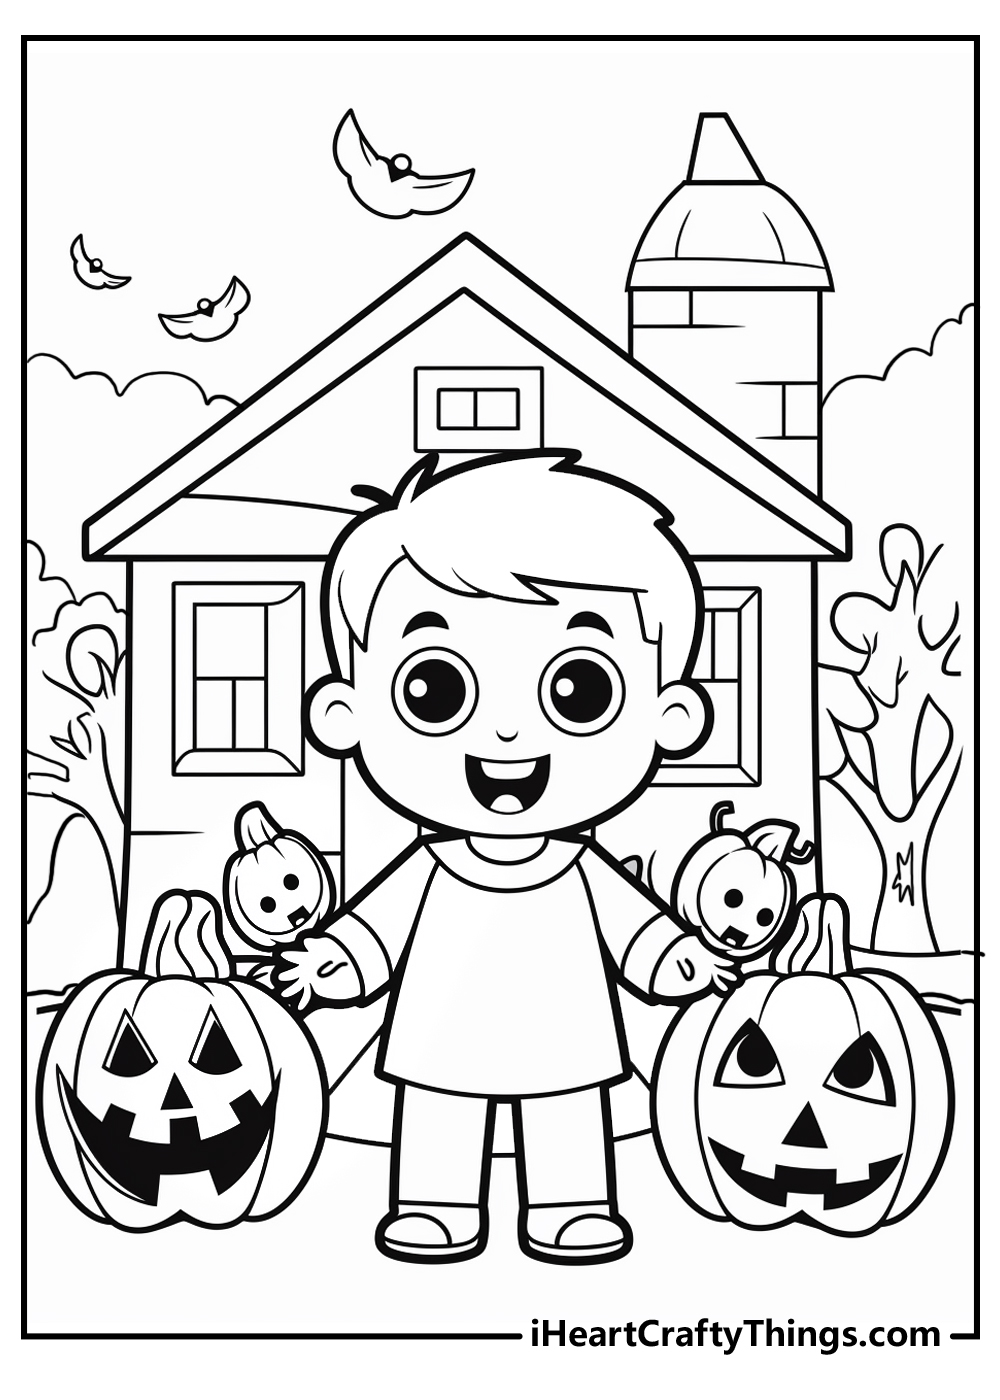 Trick or treat coloring pages free printables